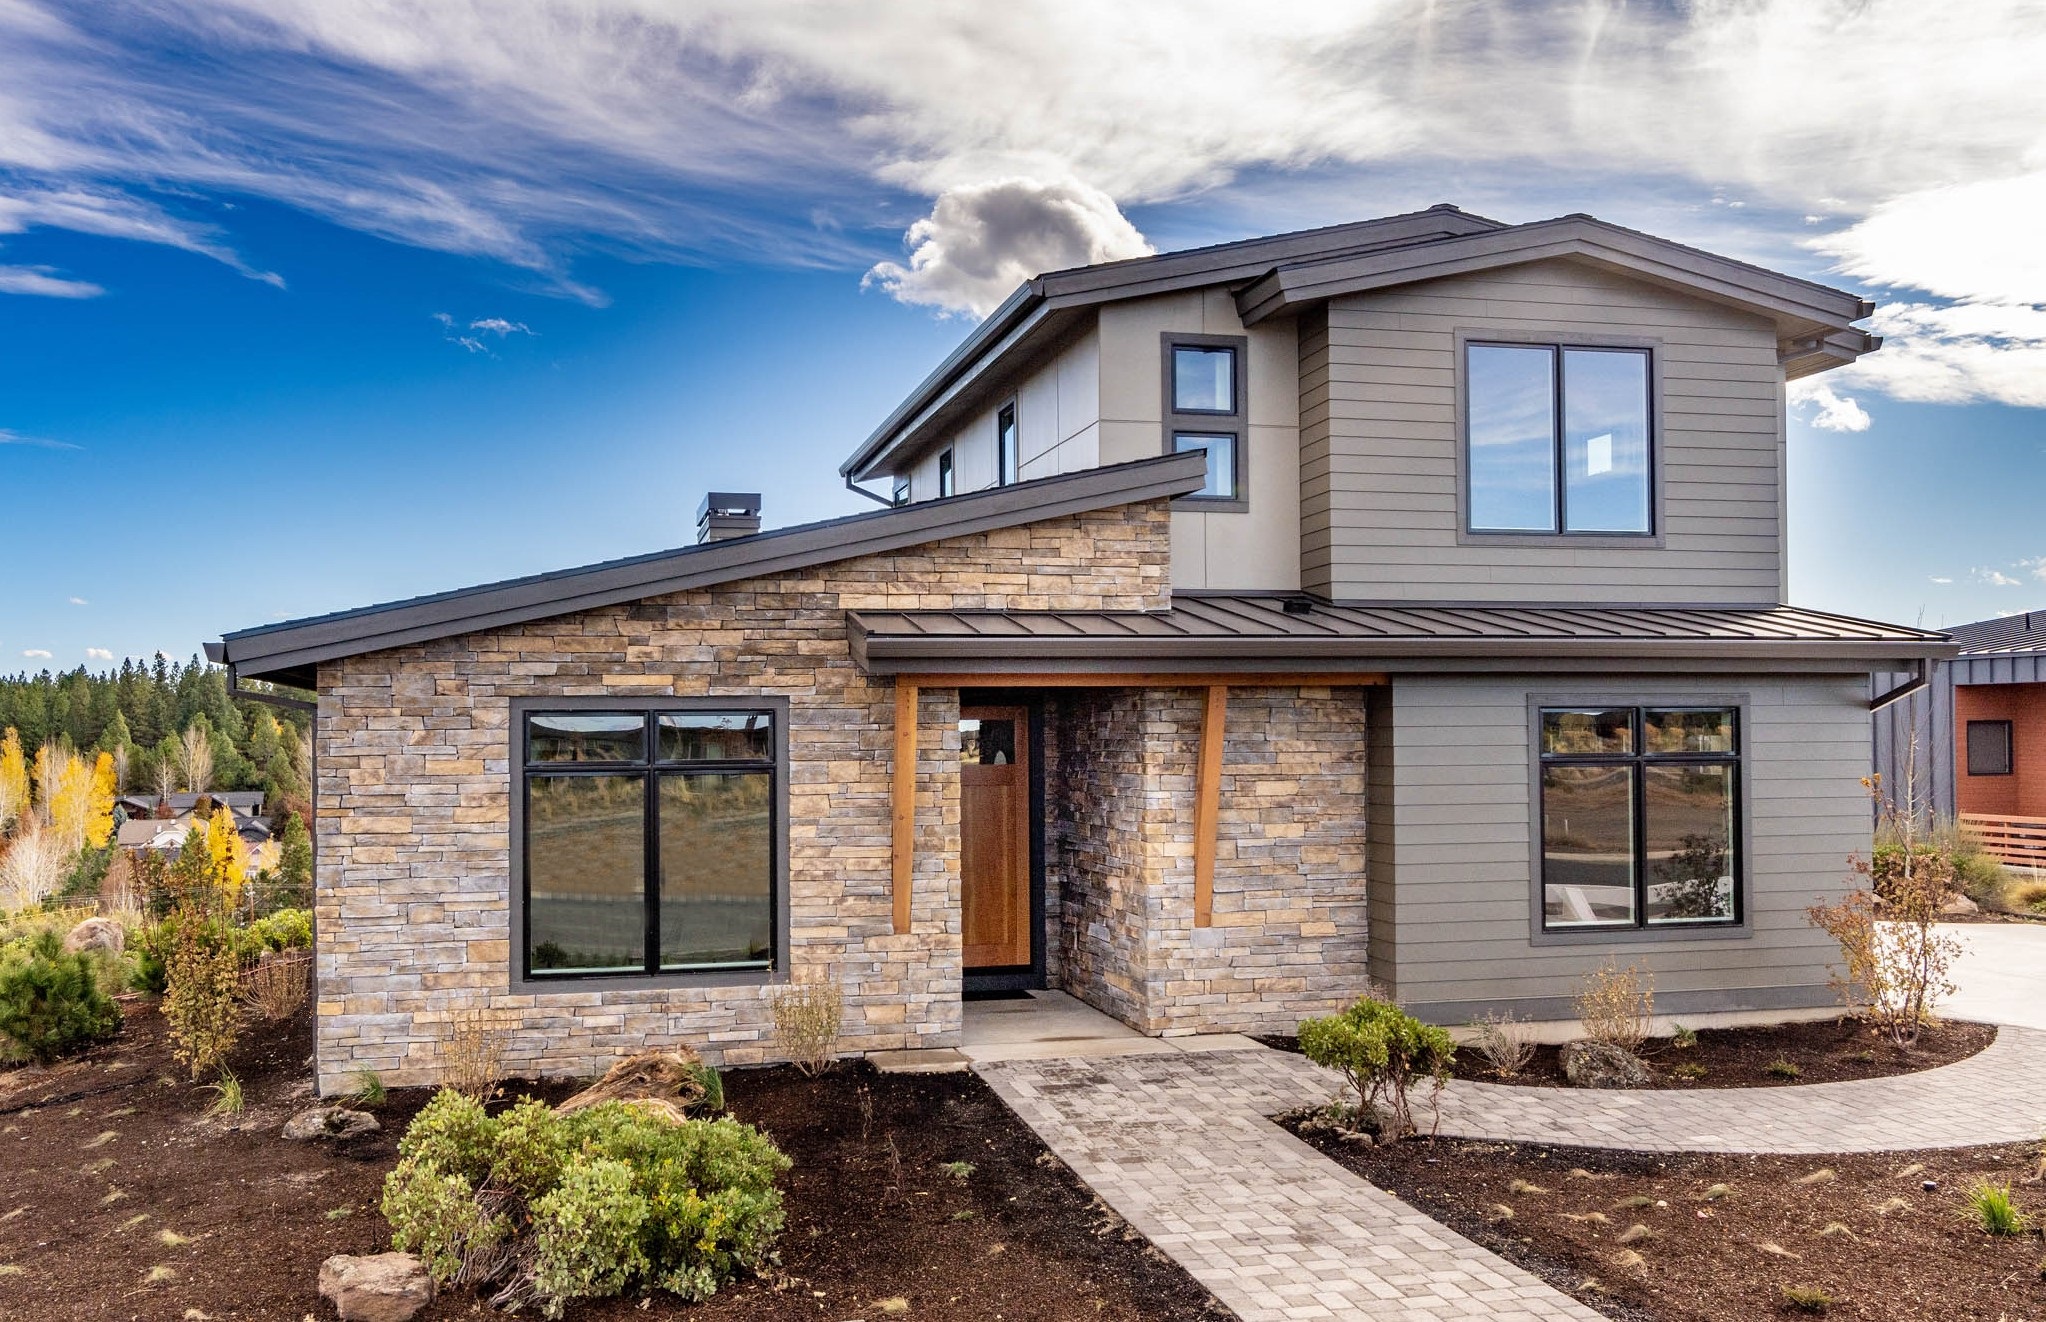 Home Builders in Washington State